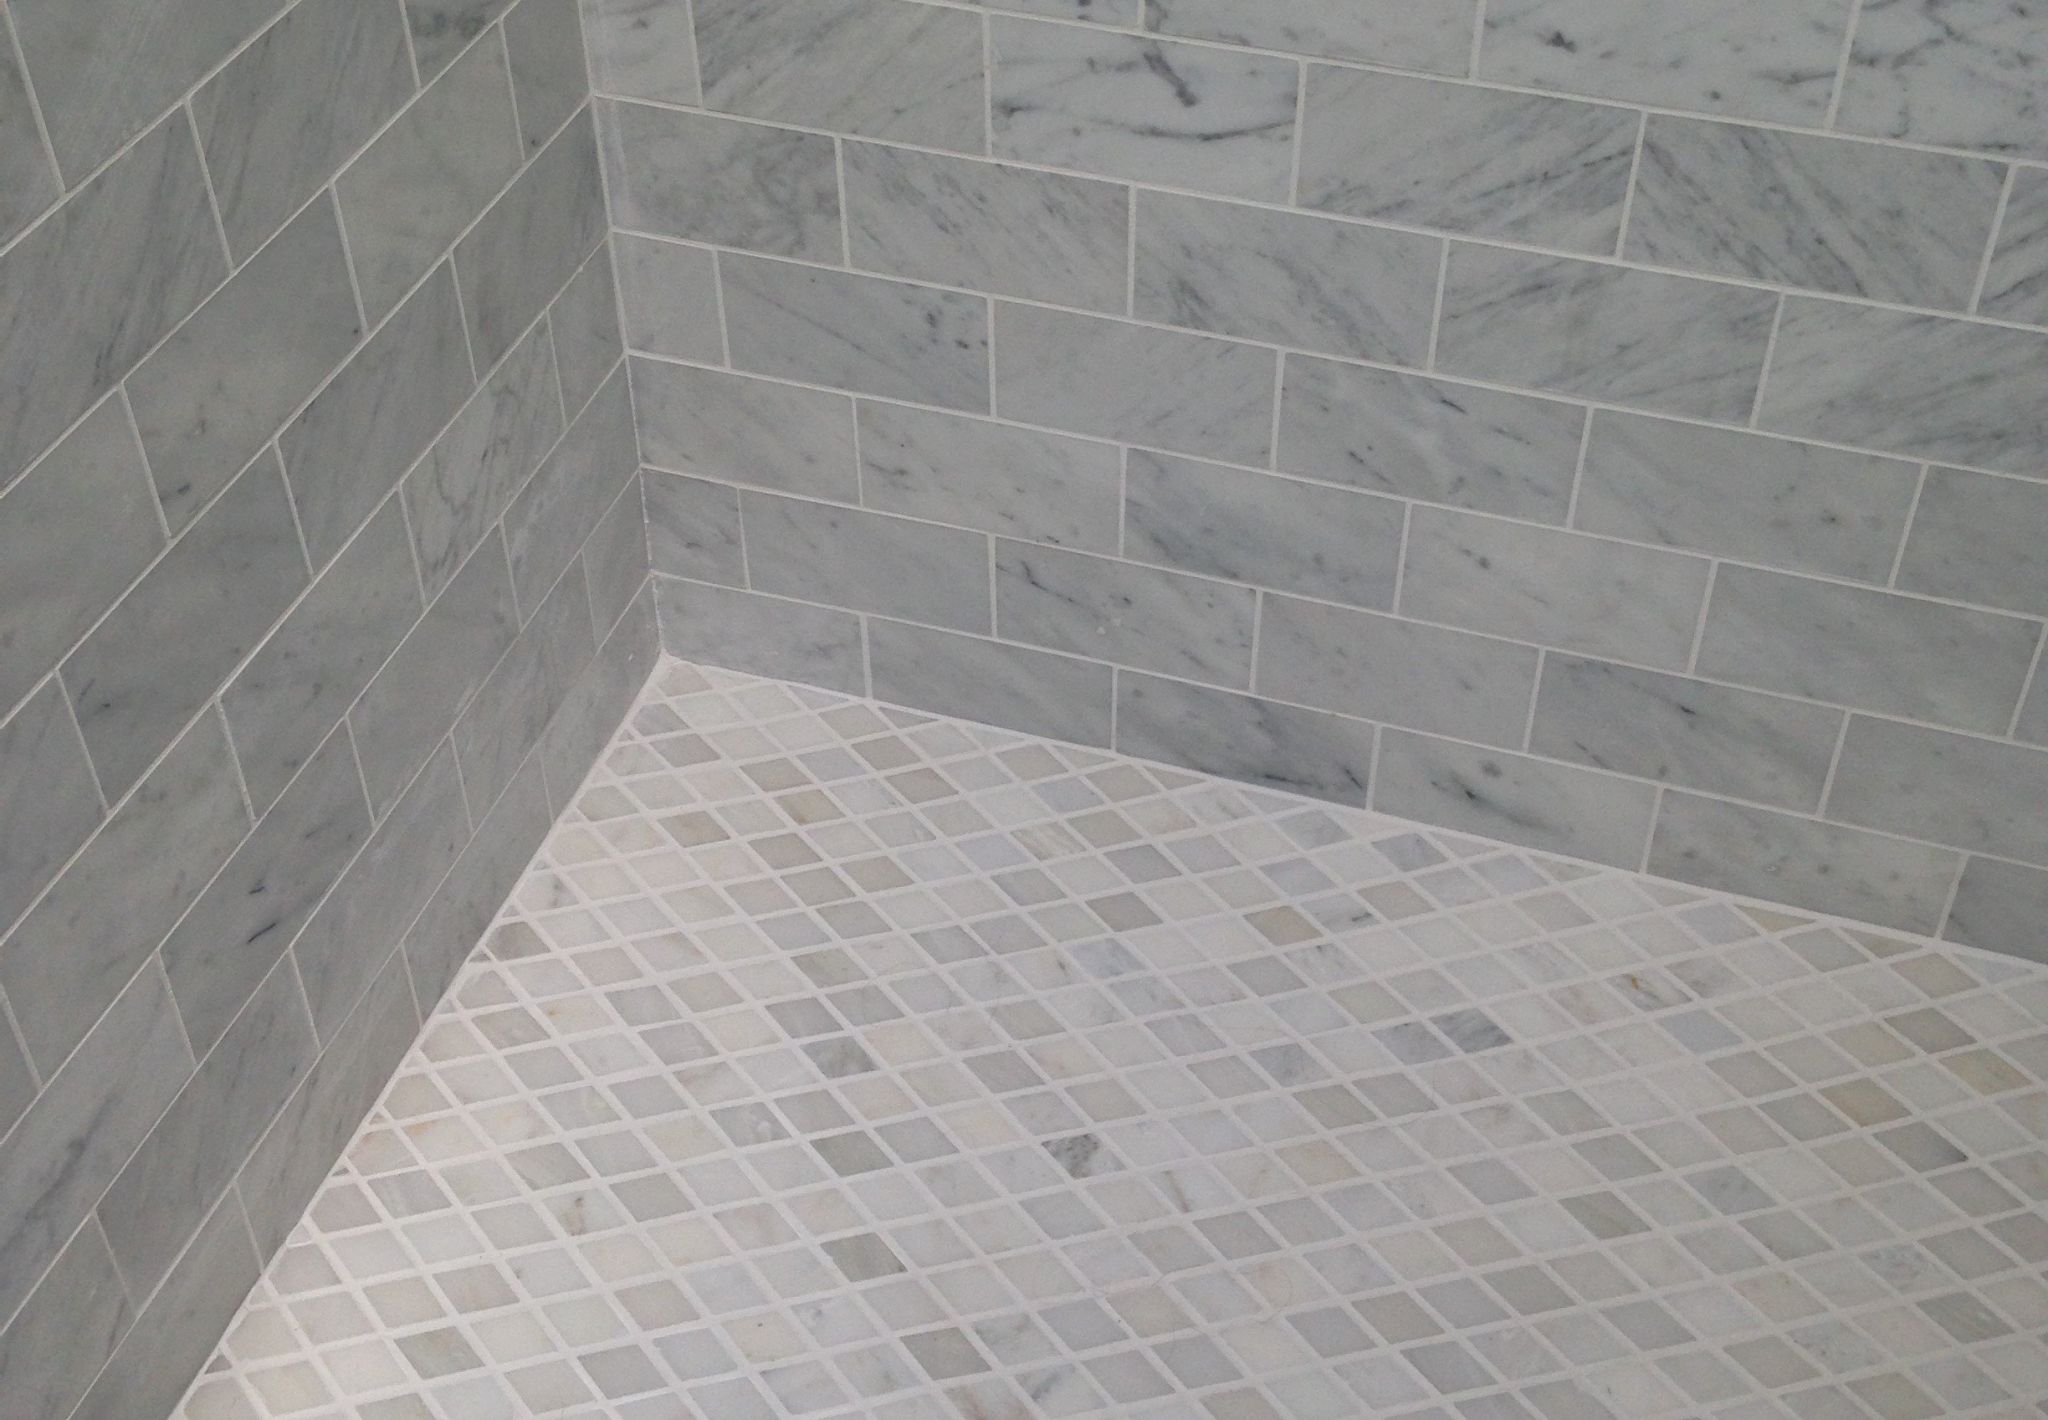 How to Choose the Right Grout Color